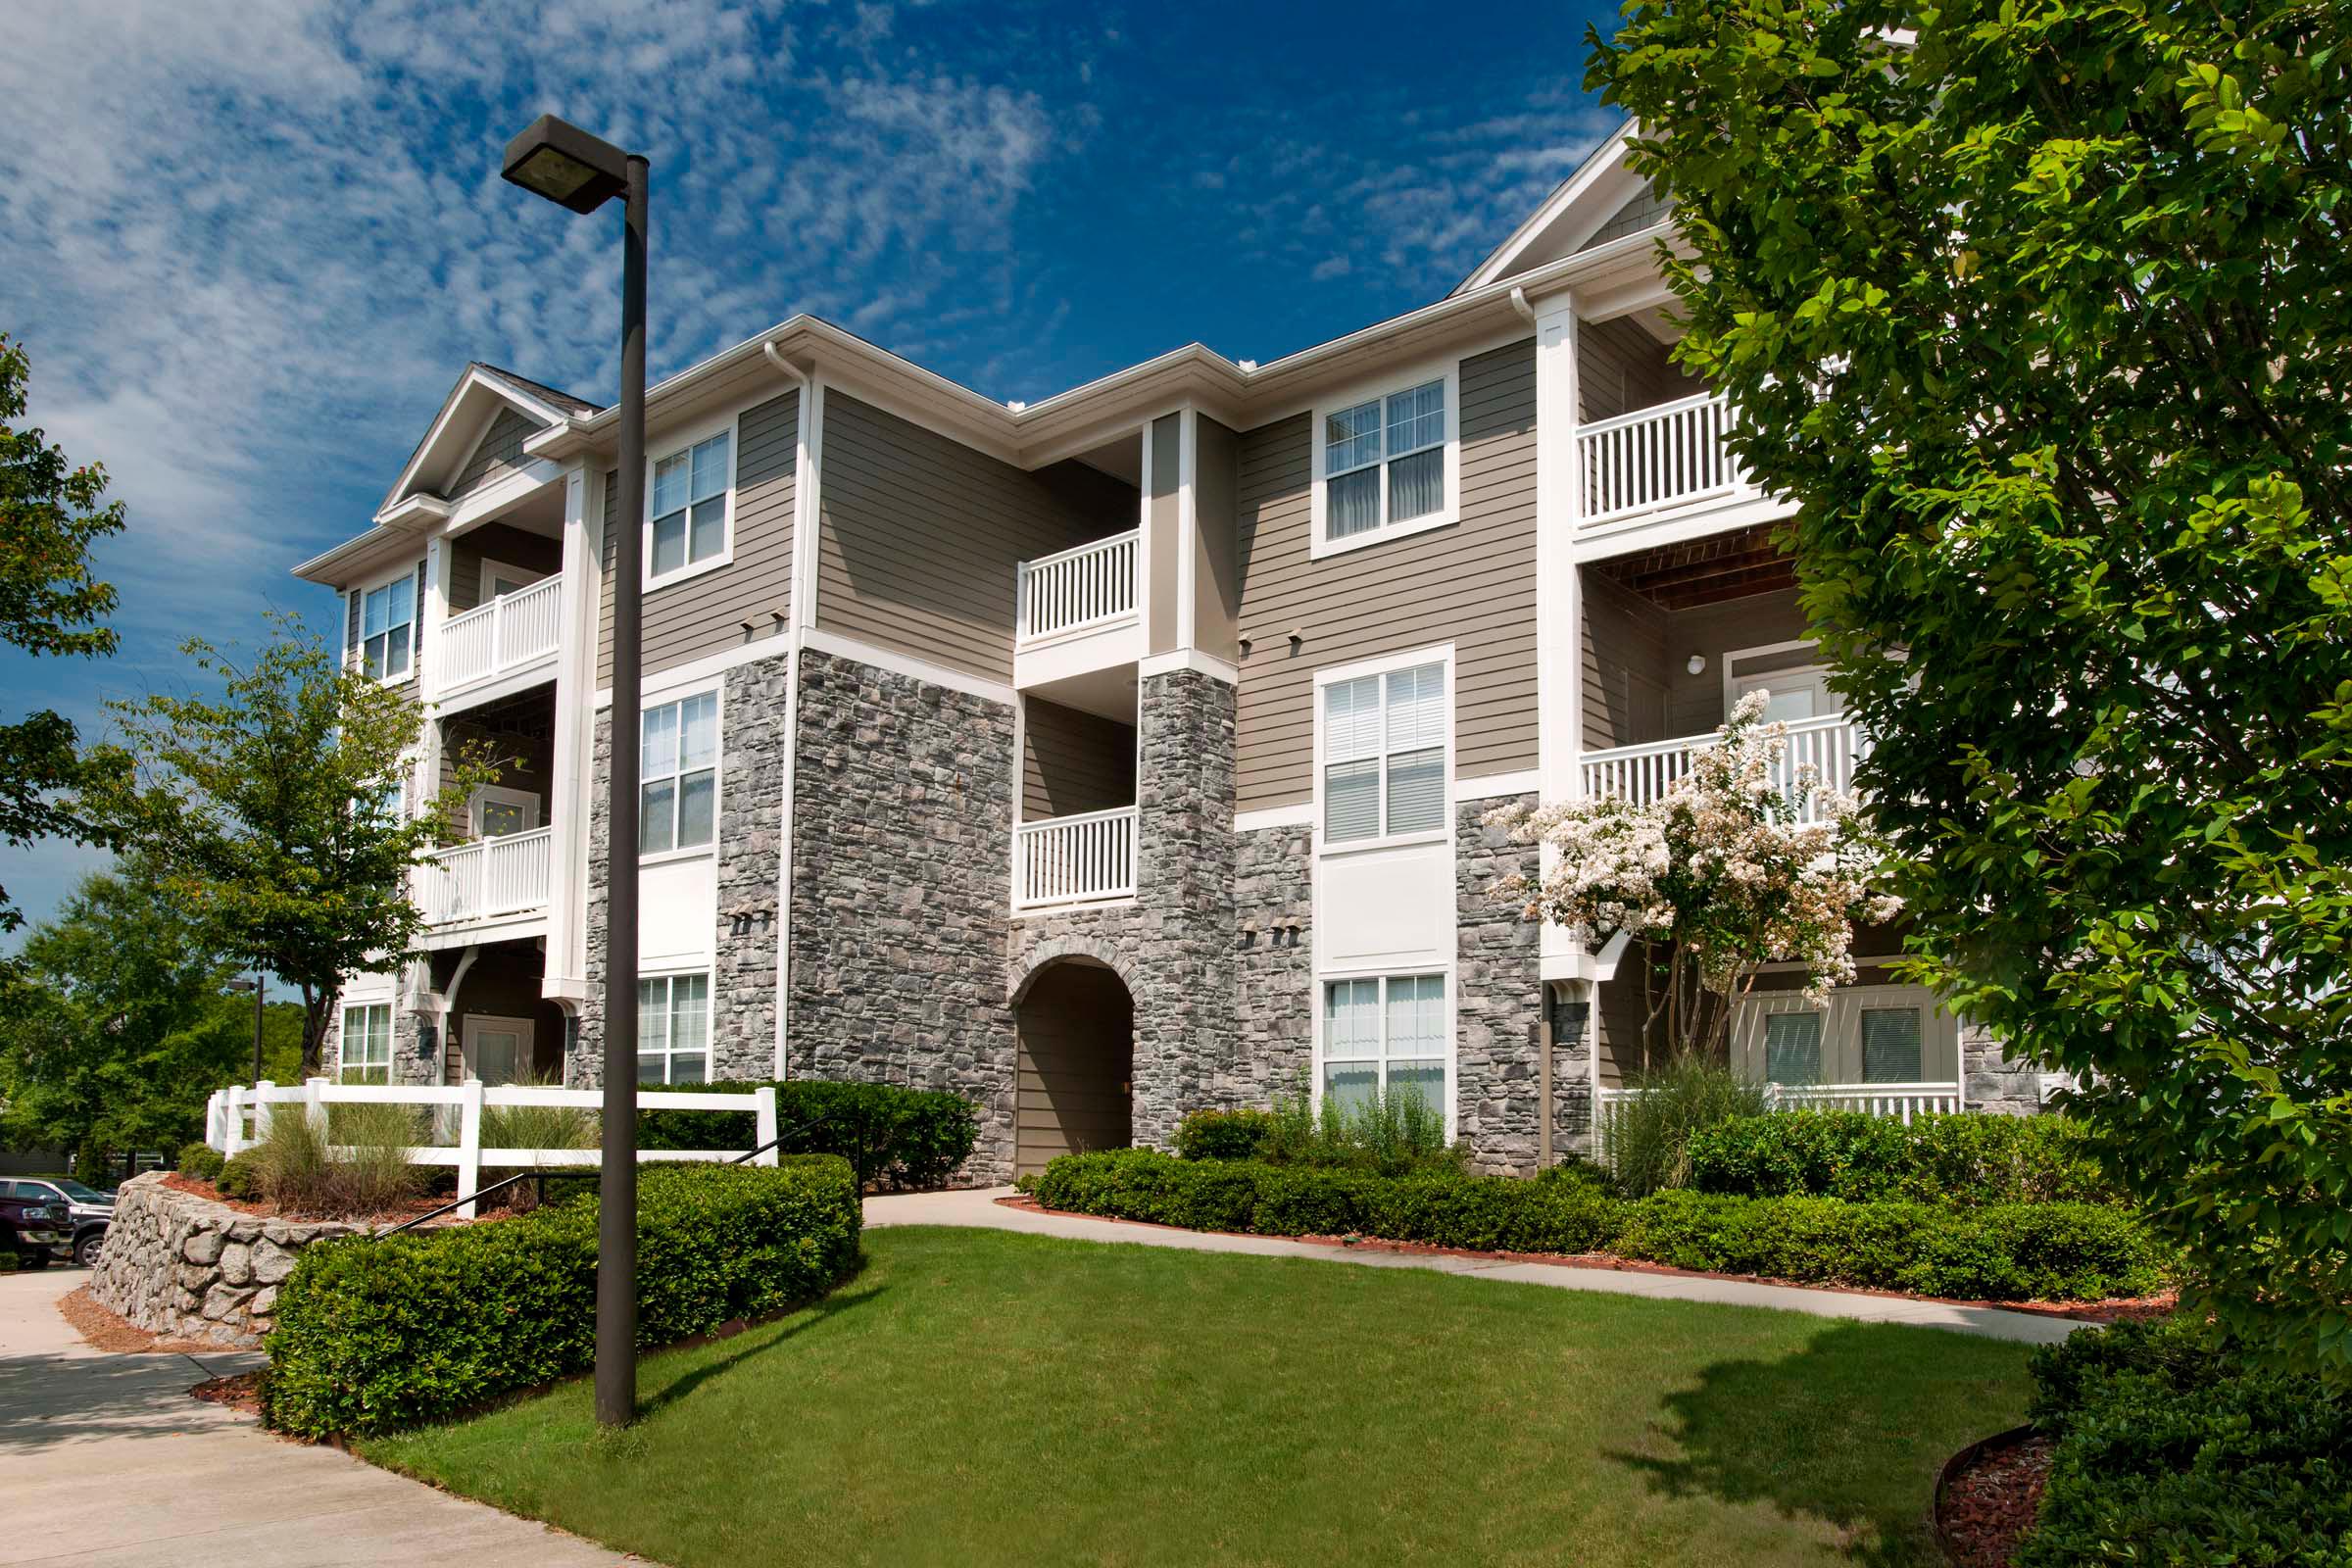 Building exterior showing private balconies and patios as well as beautiful landscaping